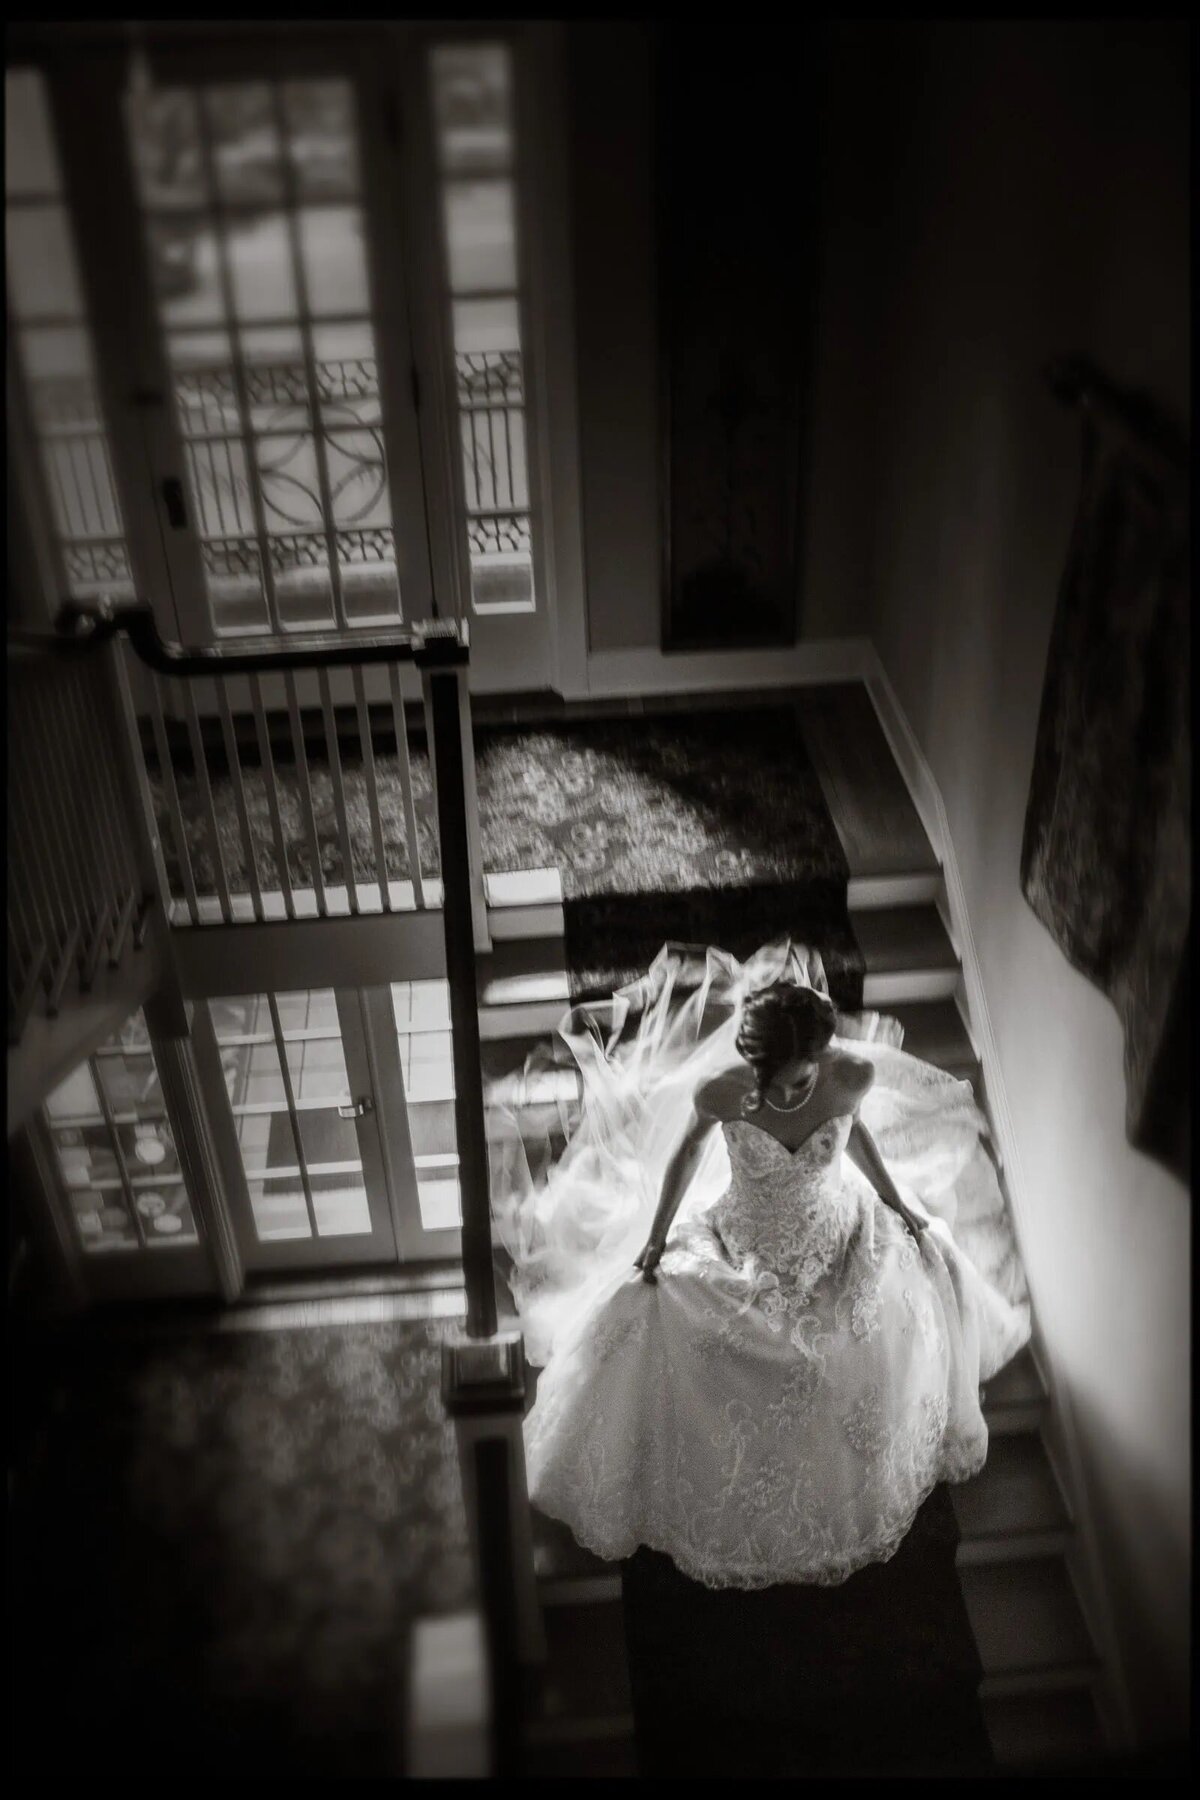 Bride elegantly descending a staircase, her gown and veil cascading behind her in a black and white photo